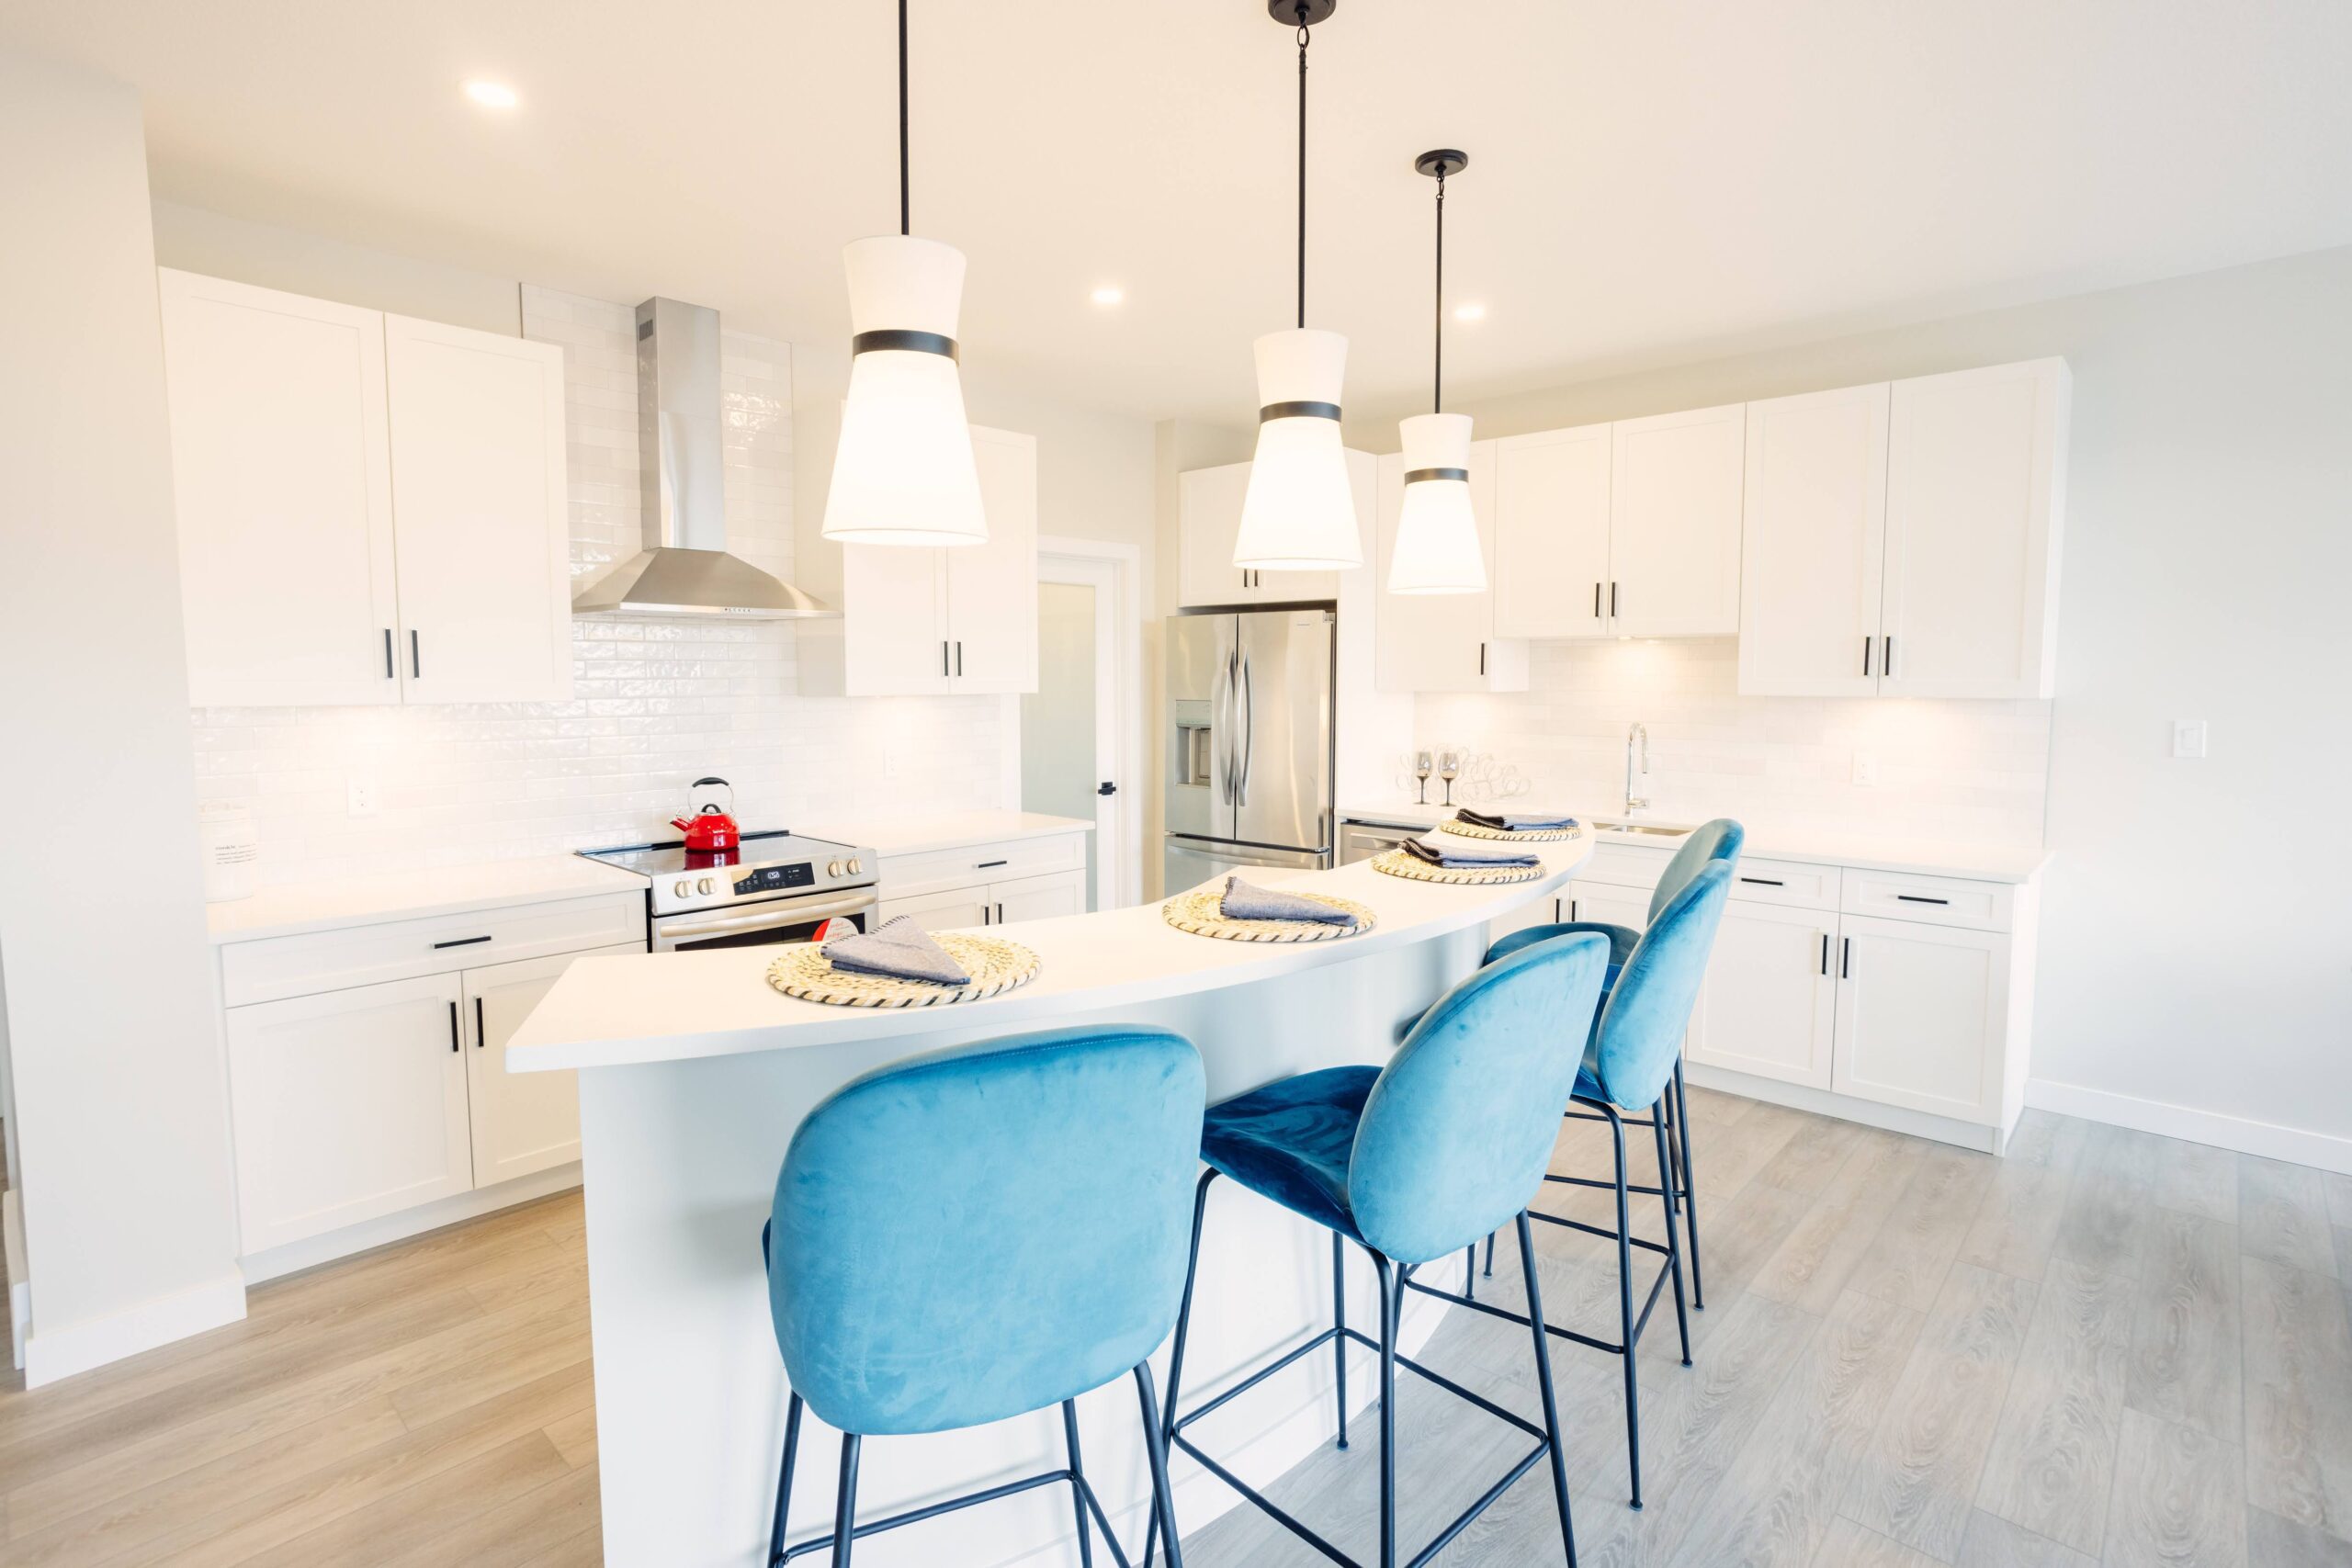 A kitchen with blue chairs and white cabinets.